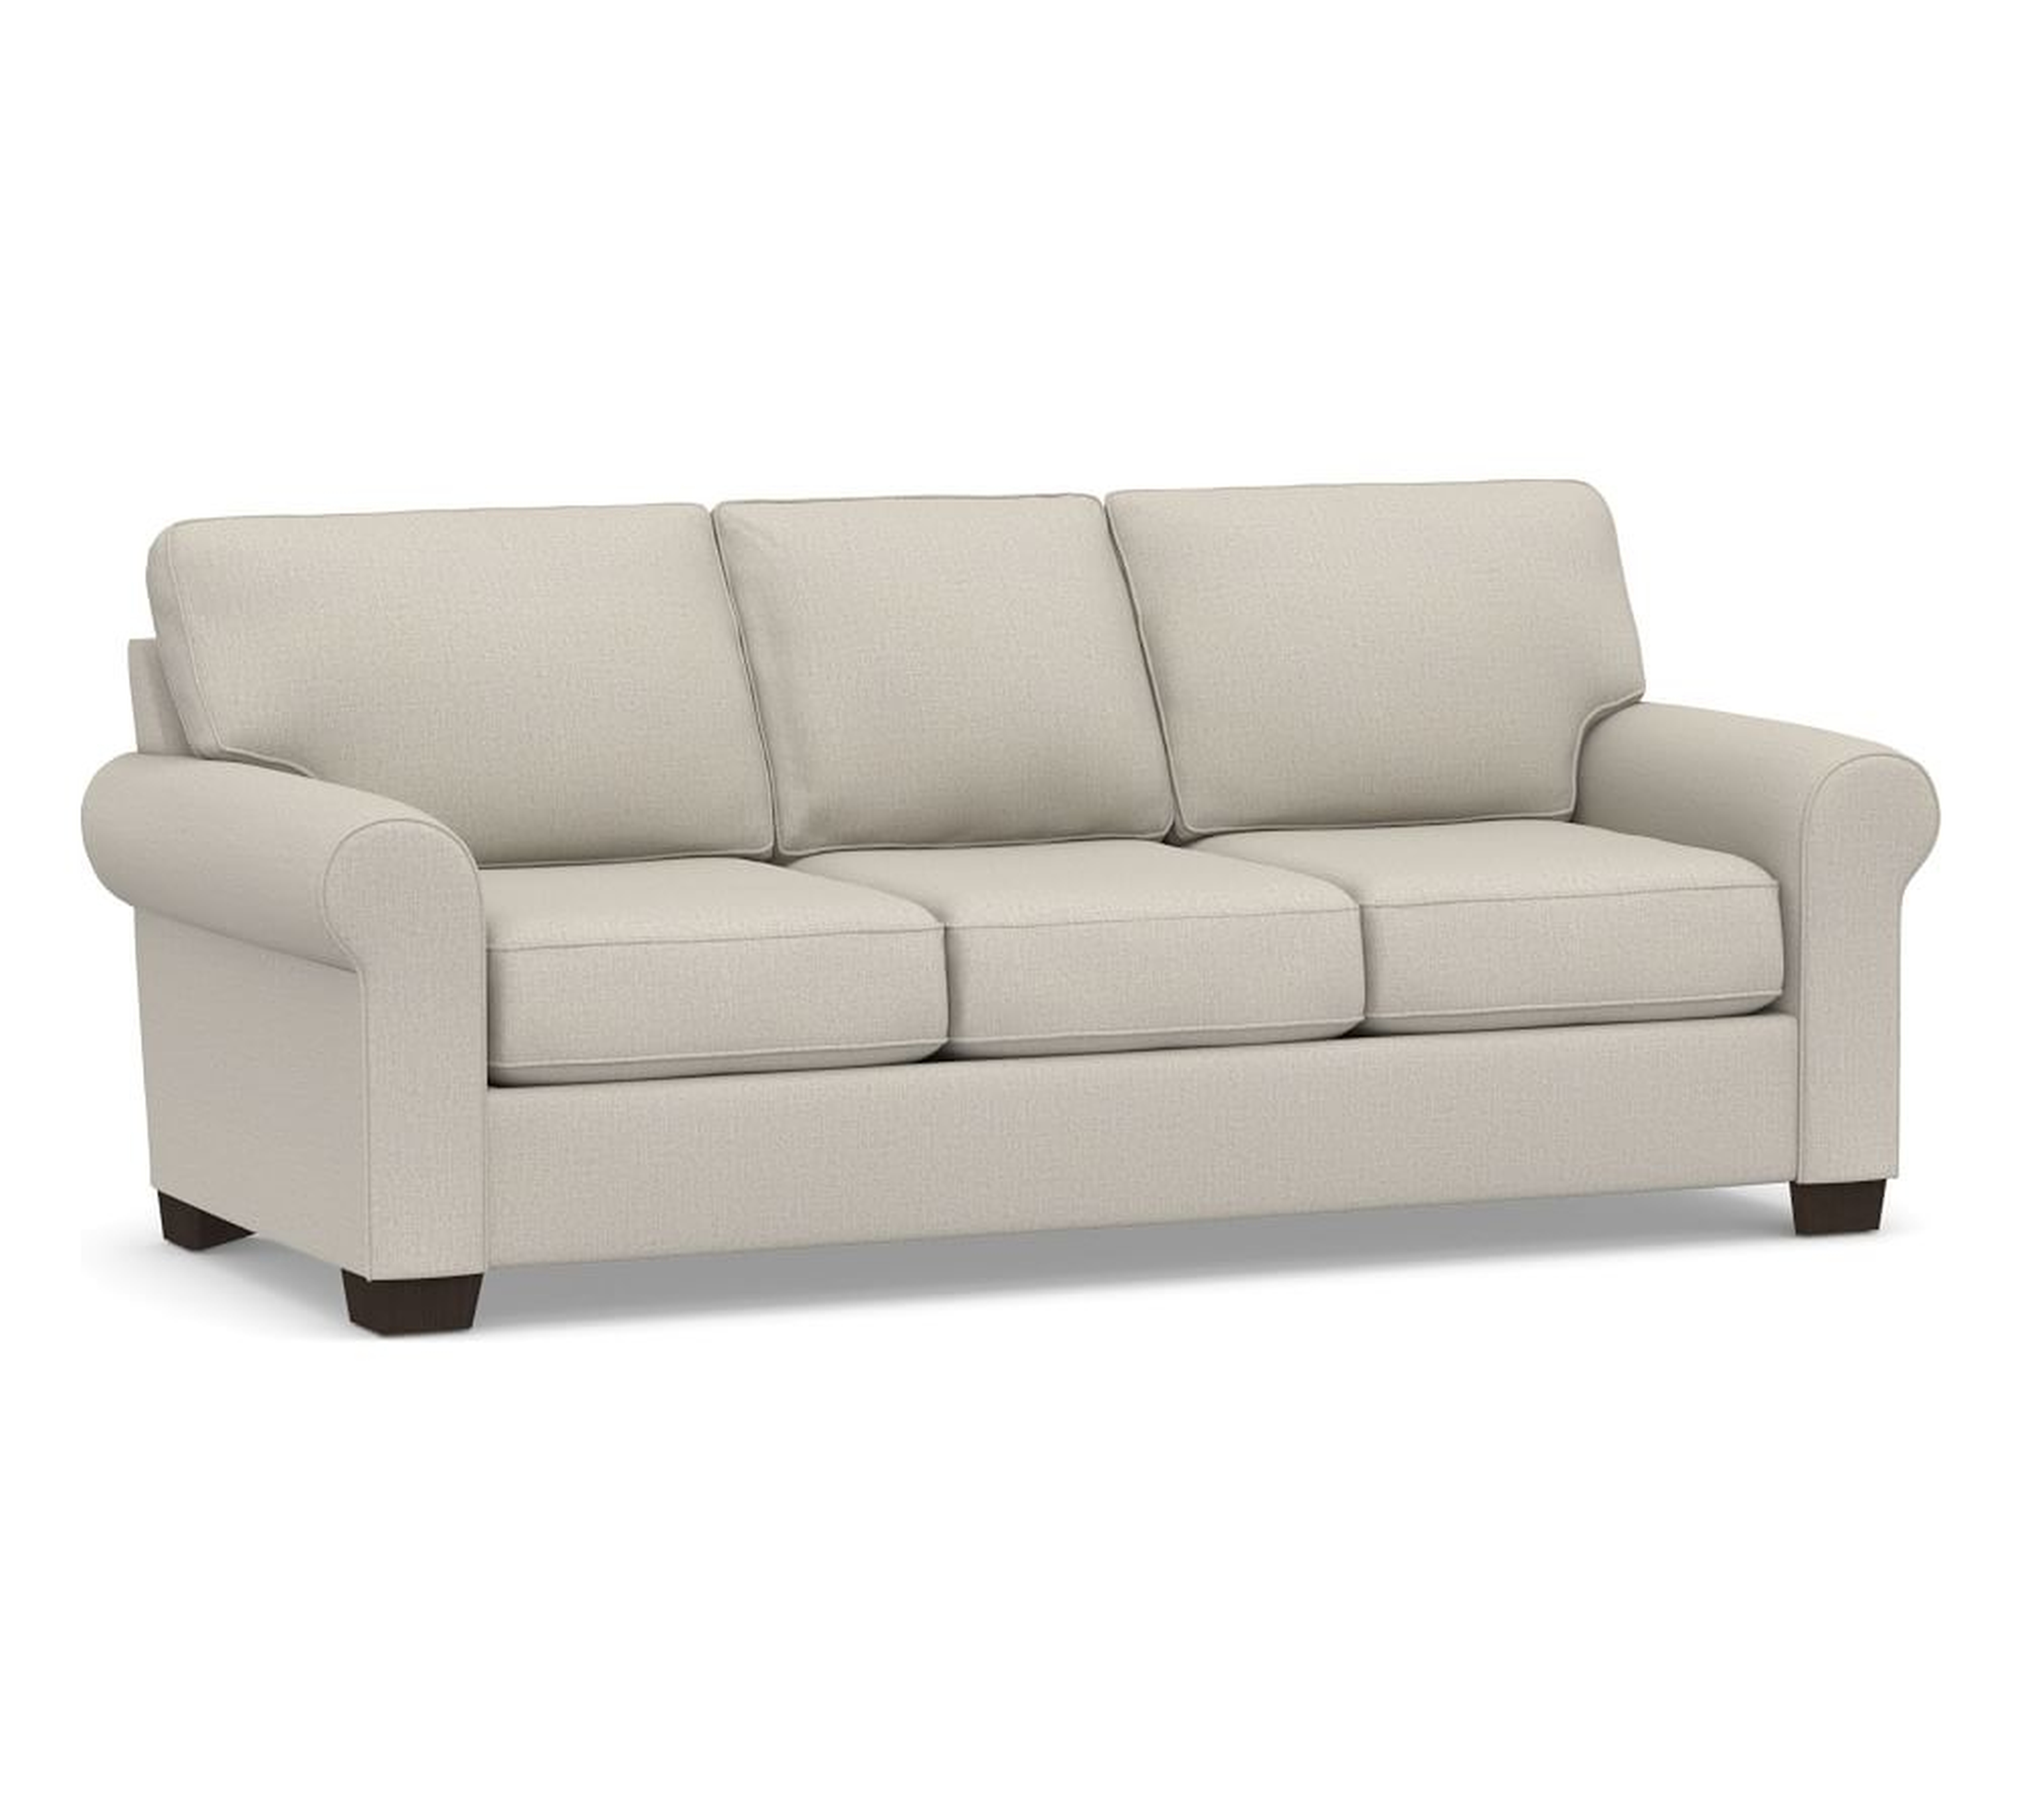 Buchanan Roll Arm Upholstered Sofa 87", Polyester Wrapped Cushions, Performance Heathered Tweed Pebble - Pottery Barn